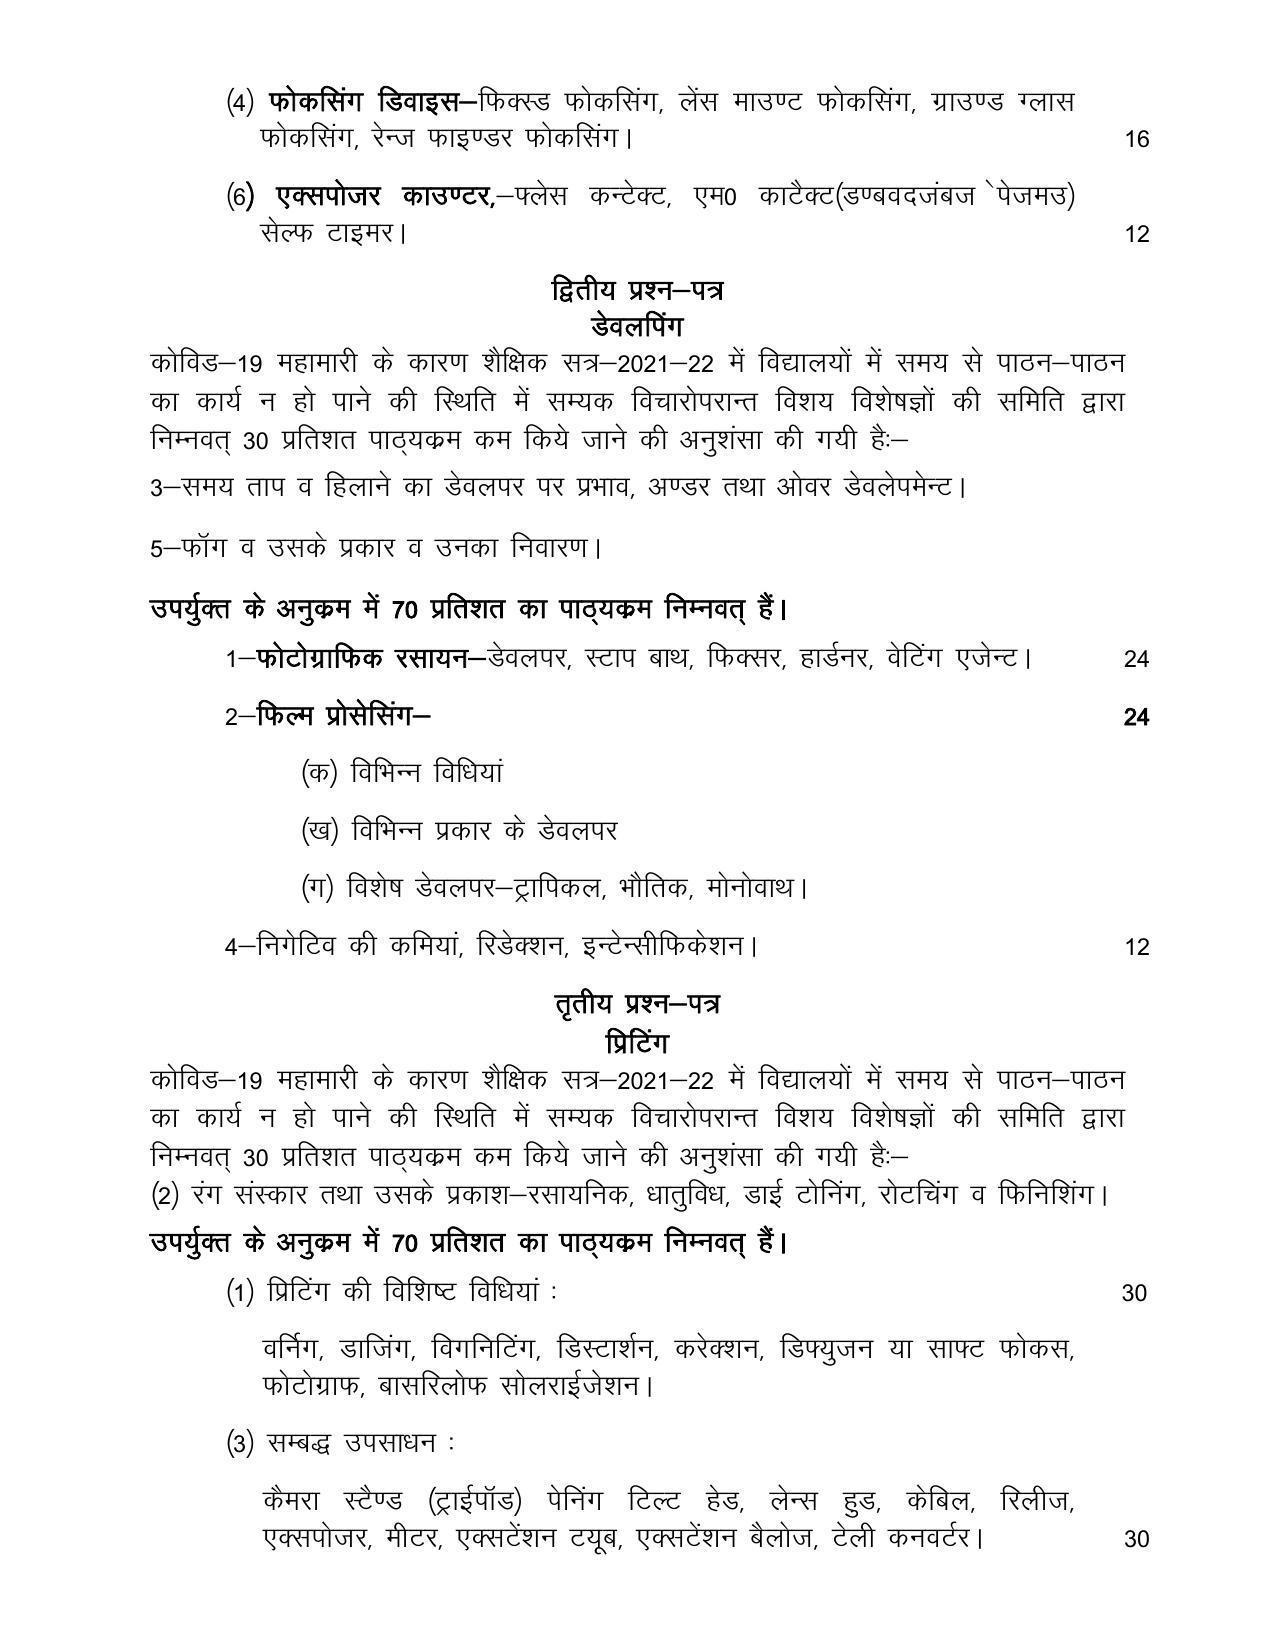 UP Board Class 12- Trade Subjects Syllabus Trade – 11 Colour Photography - Page 2